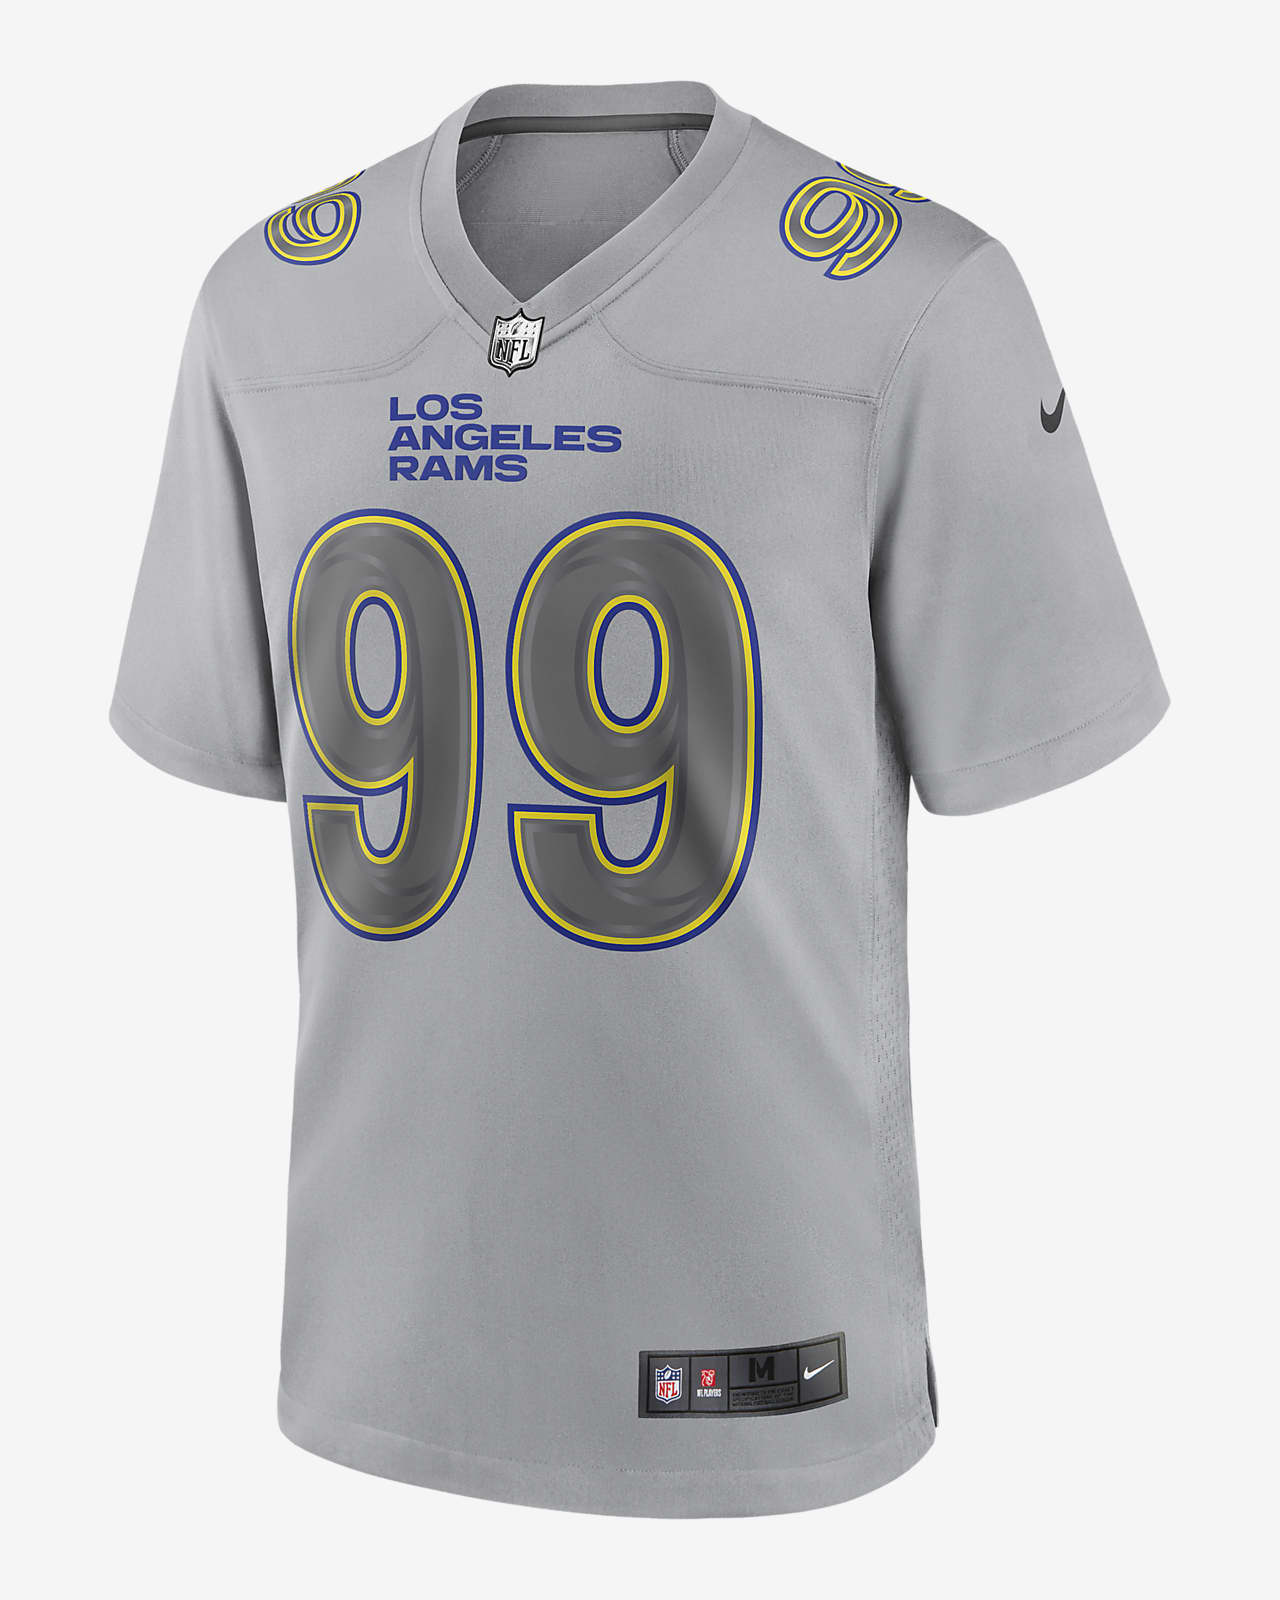 NFL Los Angeles Rams Atmosphere (Aaron Donald) Men's Fashion Football  Jersey